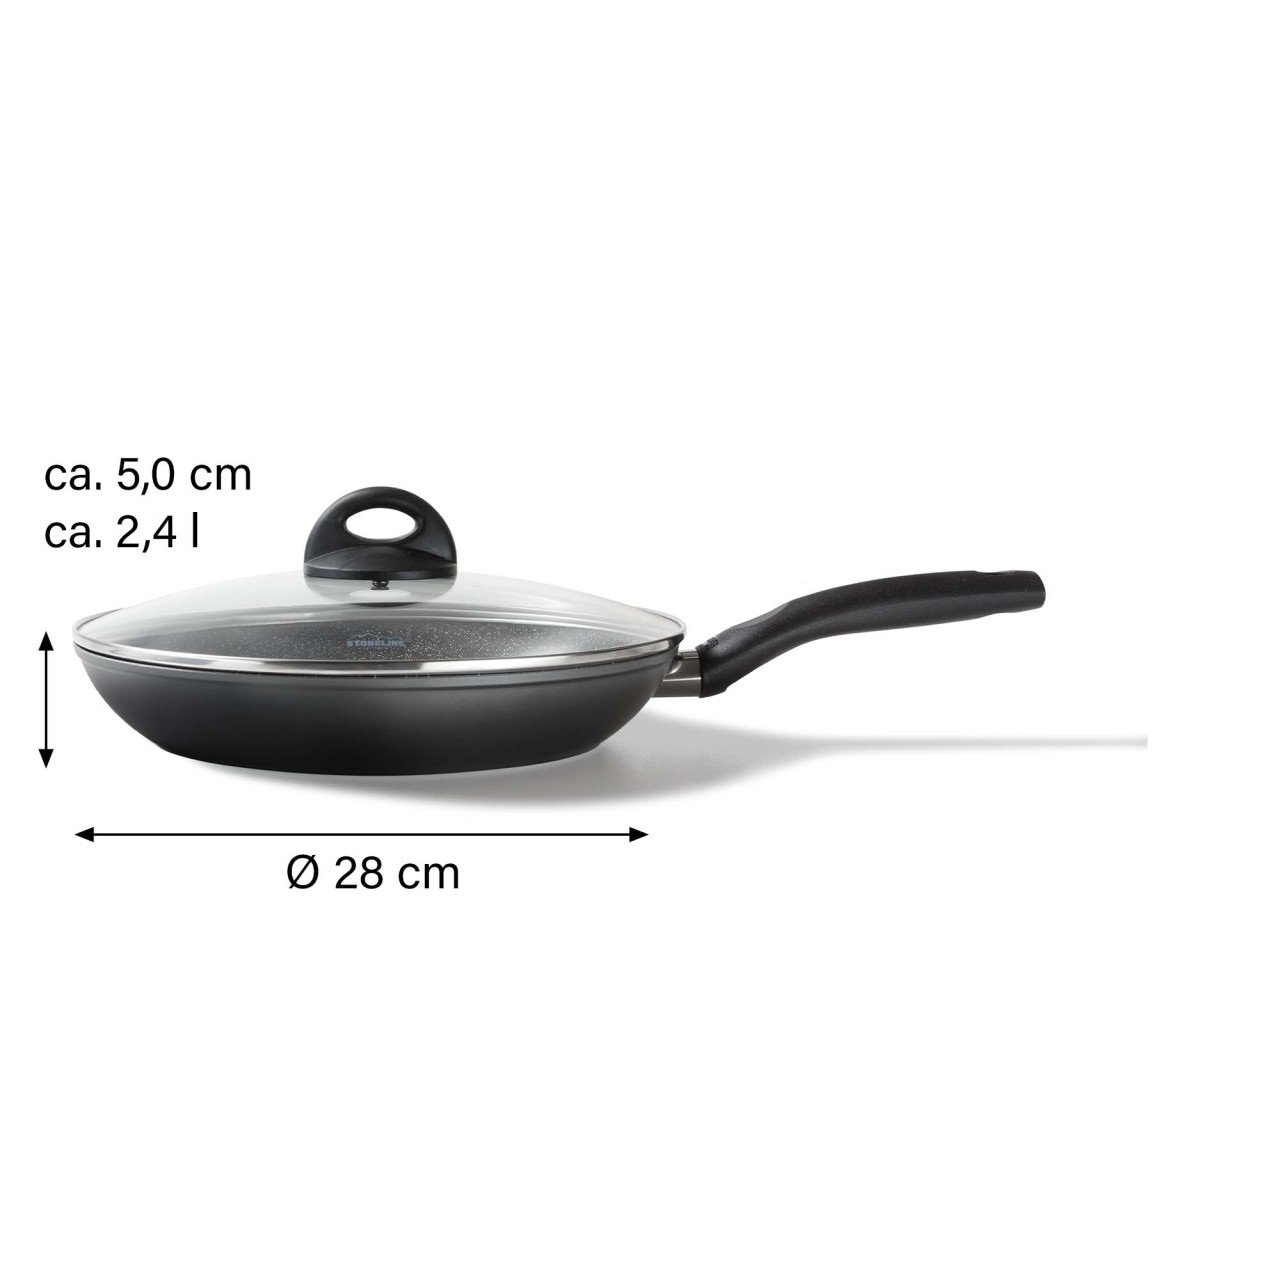 STONELINE® CERAMIC frying pan 28 cm, ceramic coating, with glass lid, suitable for induction